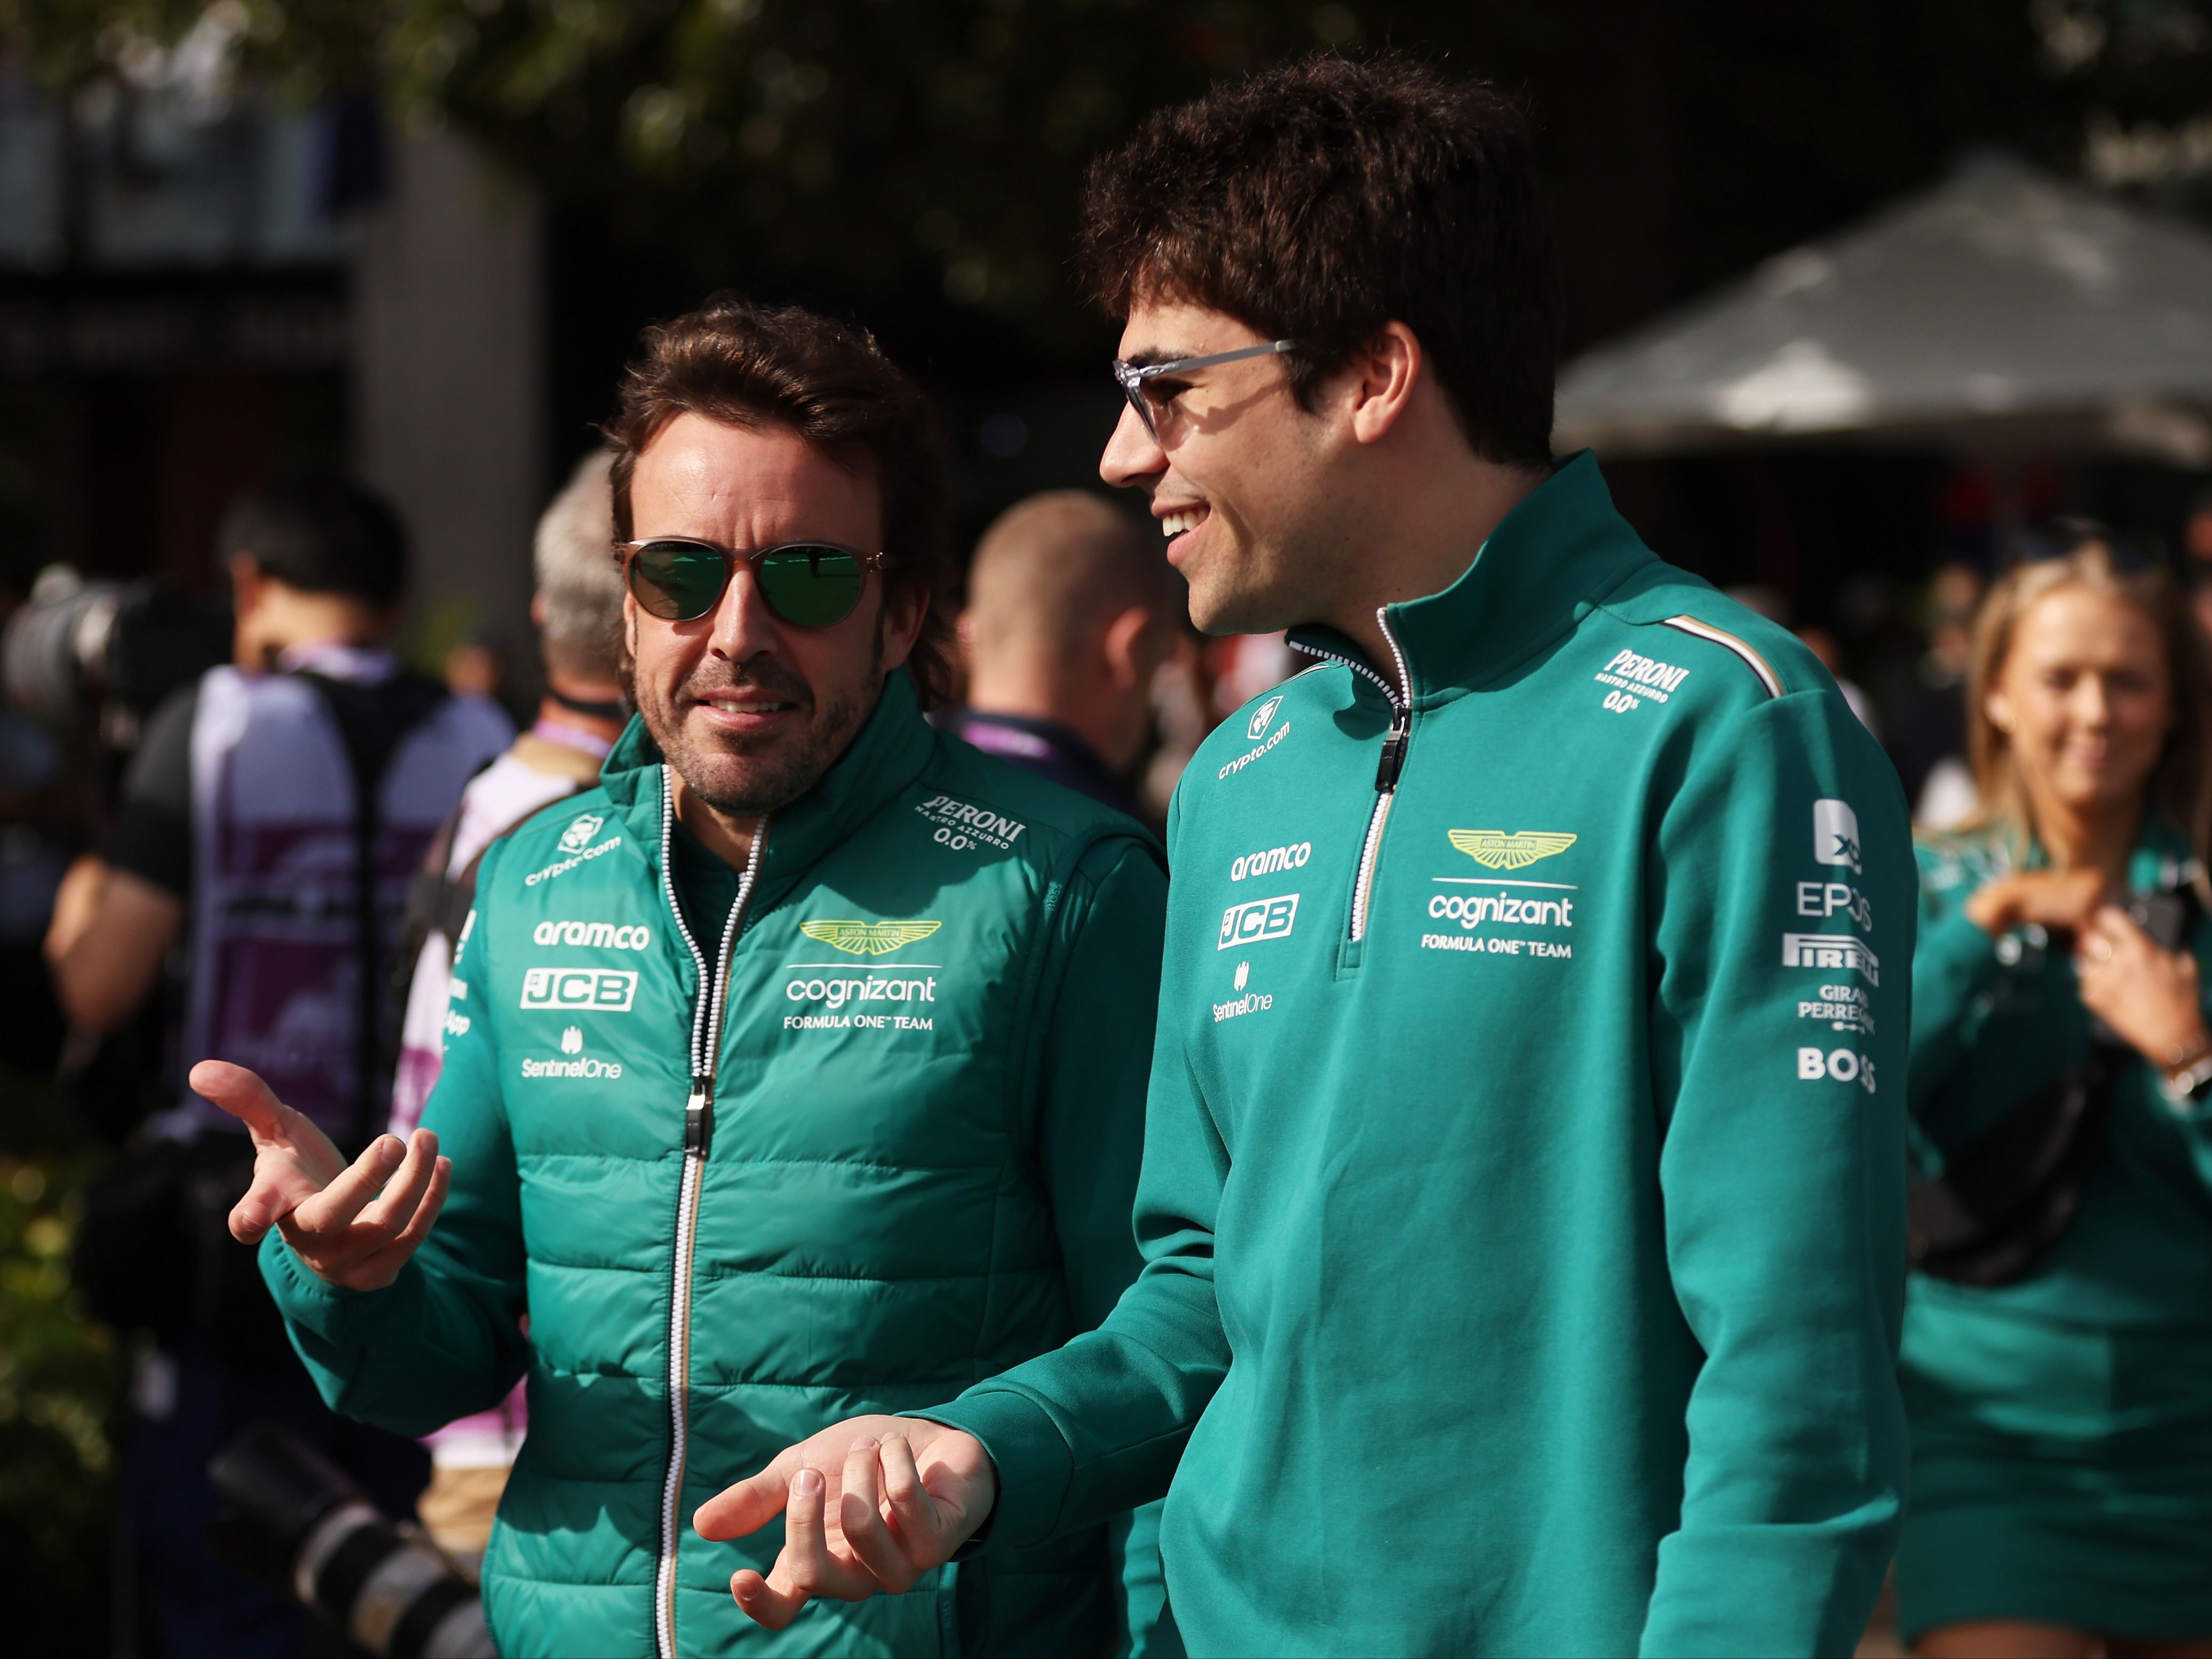 Fernando Alonso and Lance Stroll talk in the paddock prior to during practice ahead of the 2023 F1 Australian Grand Prix. (Photo by Robert Cianflone/Getty Images)